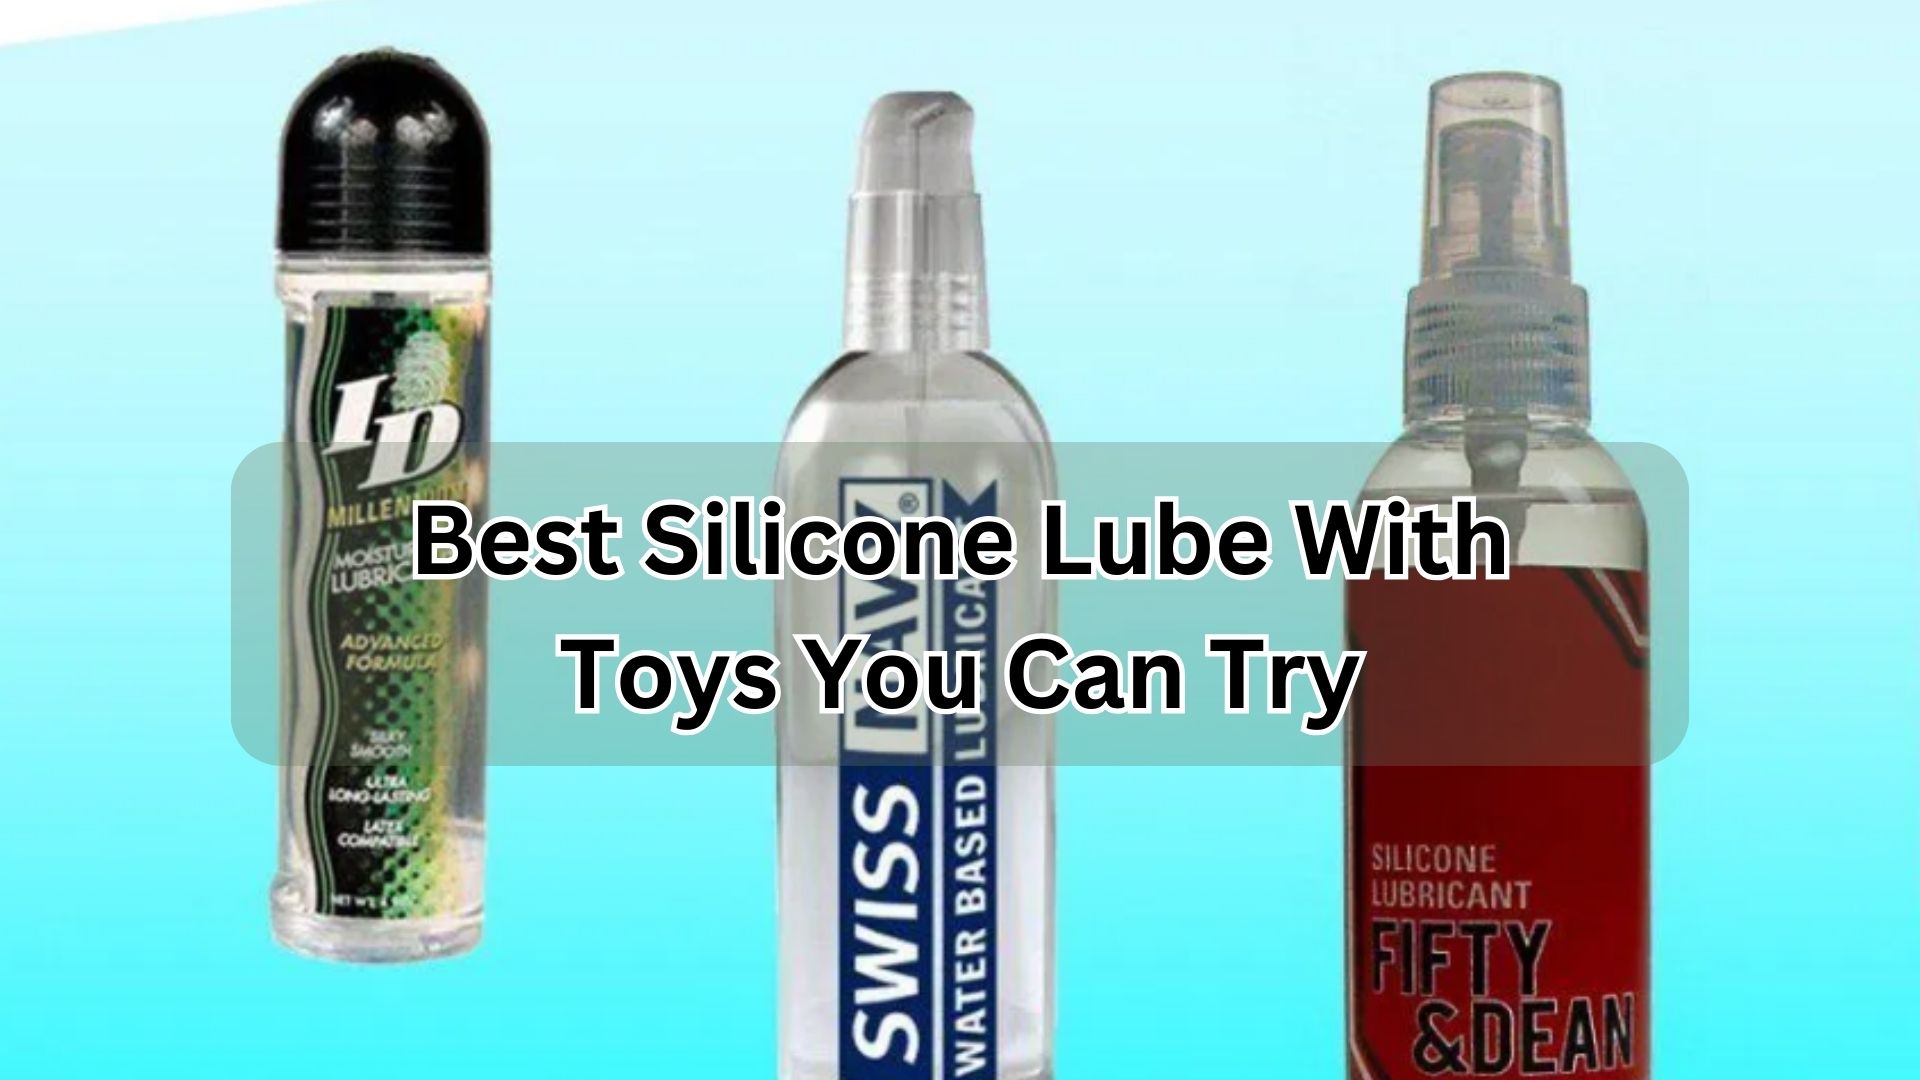 Best Silicone Lube With Toys You Can Try